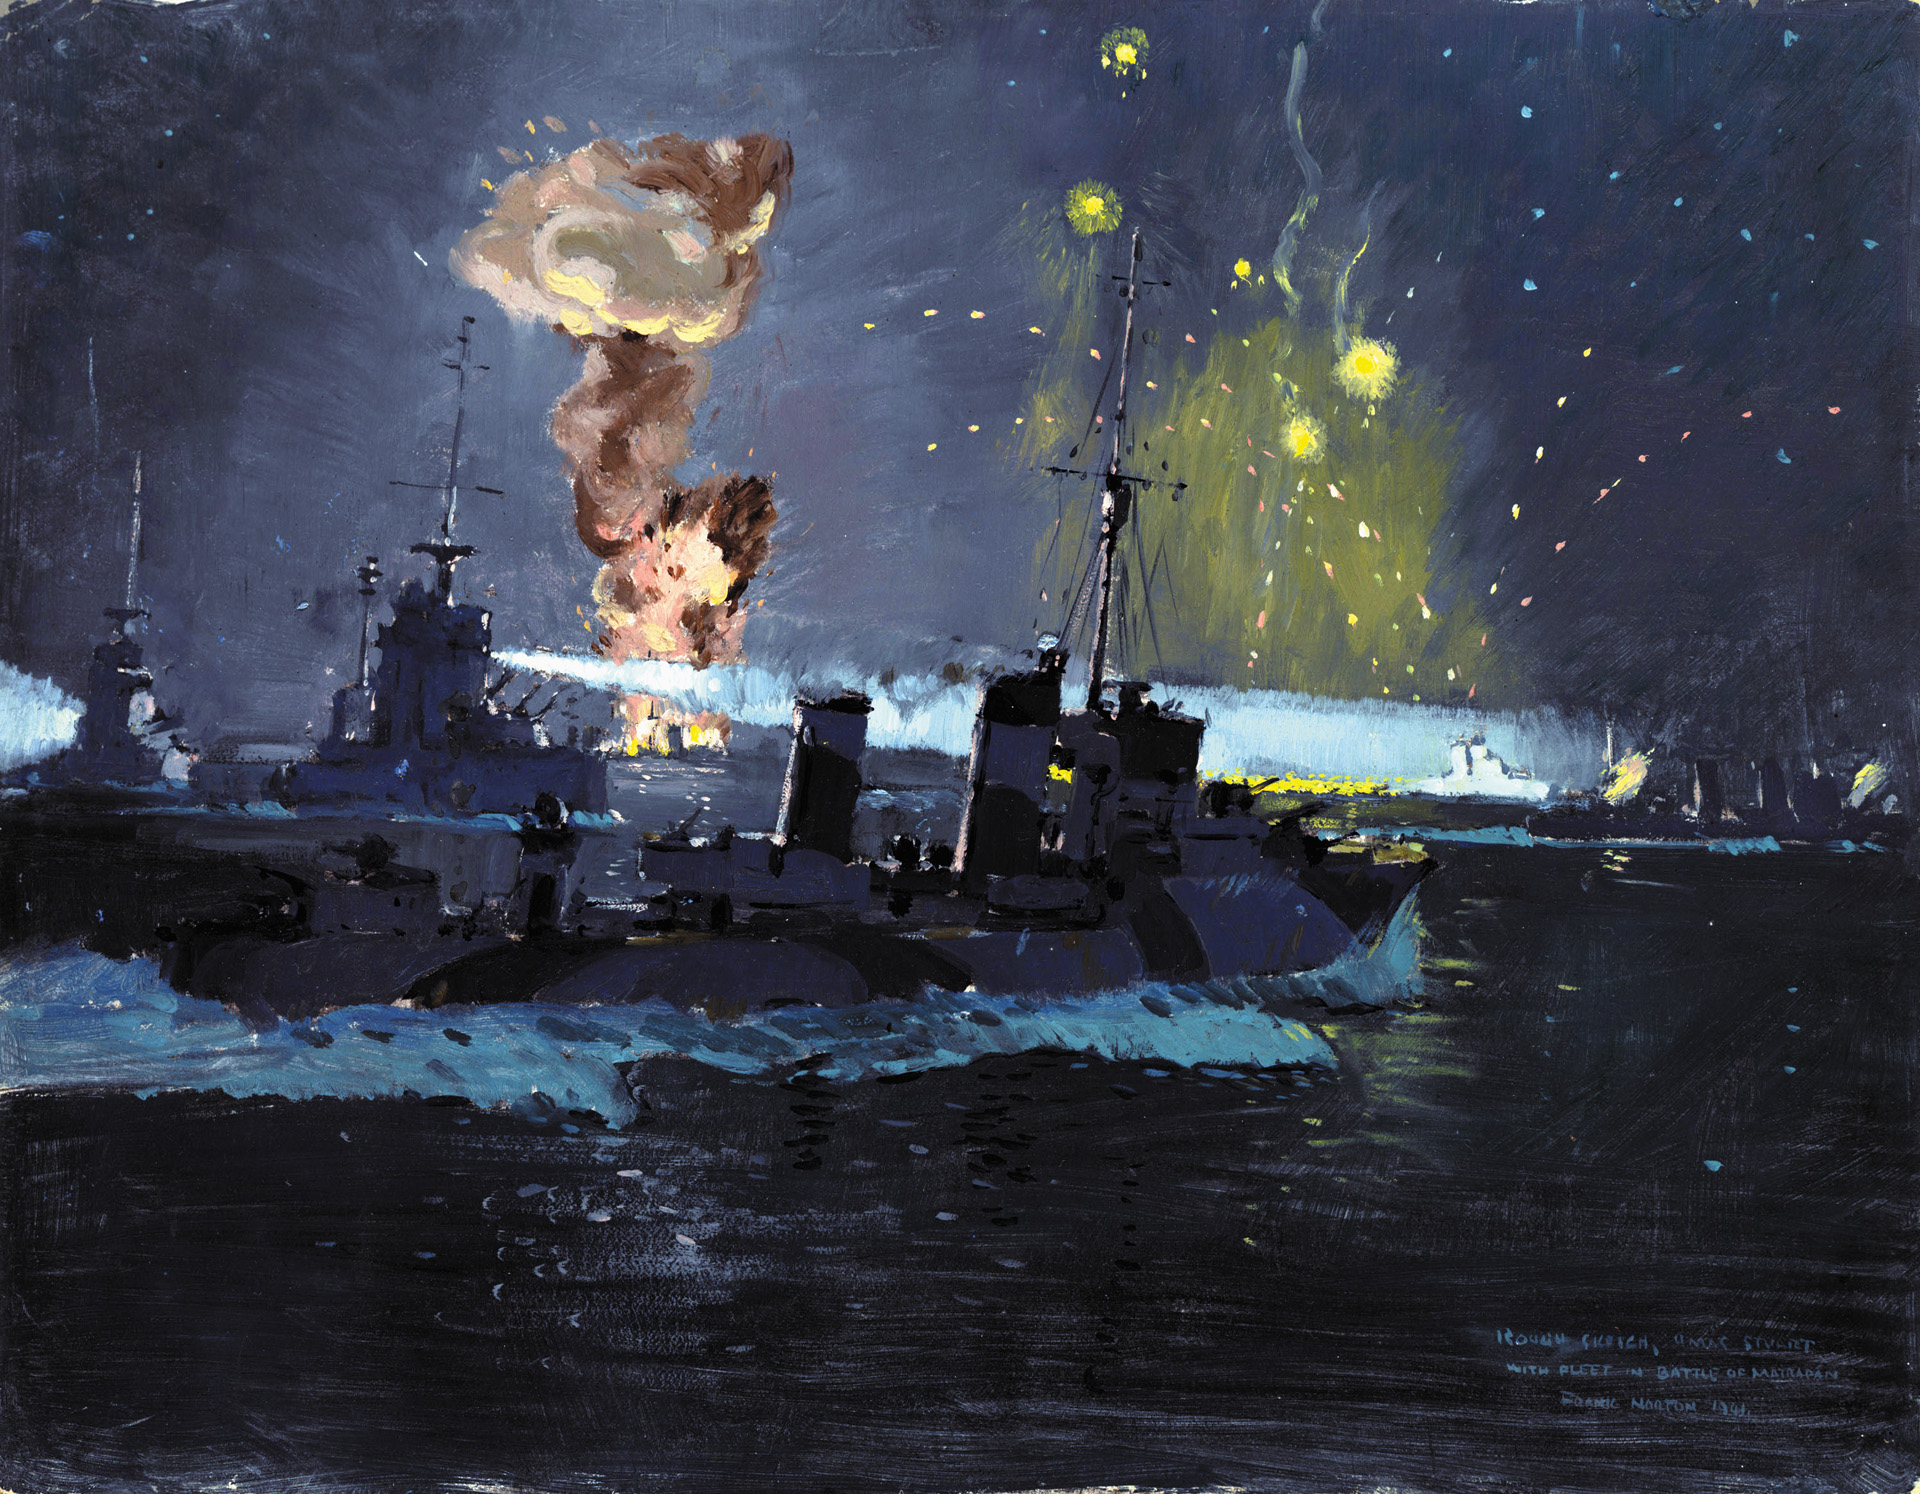 Radar gave the British Royal Navy a decided advantage during the Battle of Cape Matapan as evidenced in this dramatic rendering of the engagement by artist Frank Norton. In the foreground the Australian cruiser Stuart and the British destroyer Havoc move against a pair of Italian Zara-class destroyers during the great British victory in the Mediterranean.